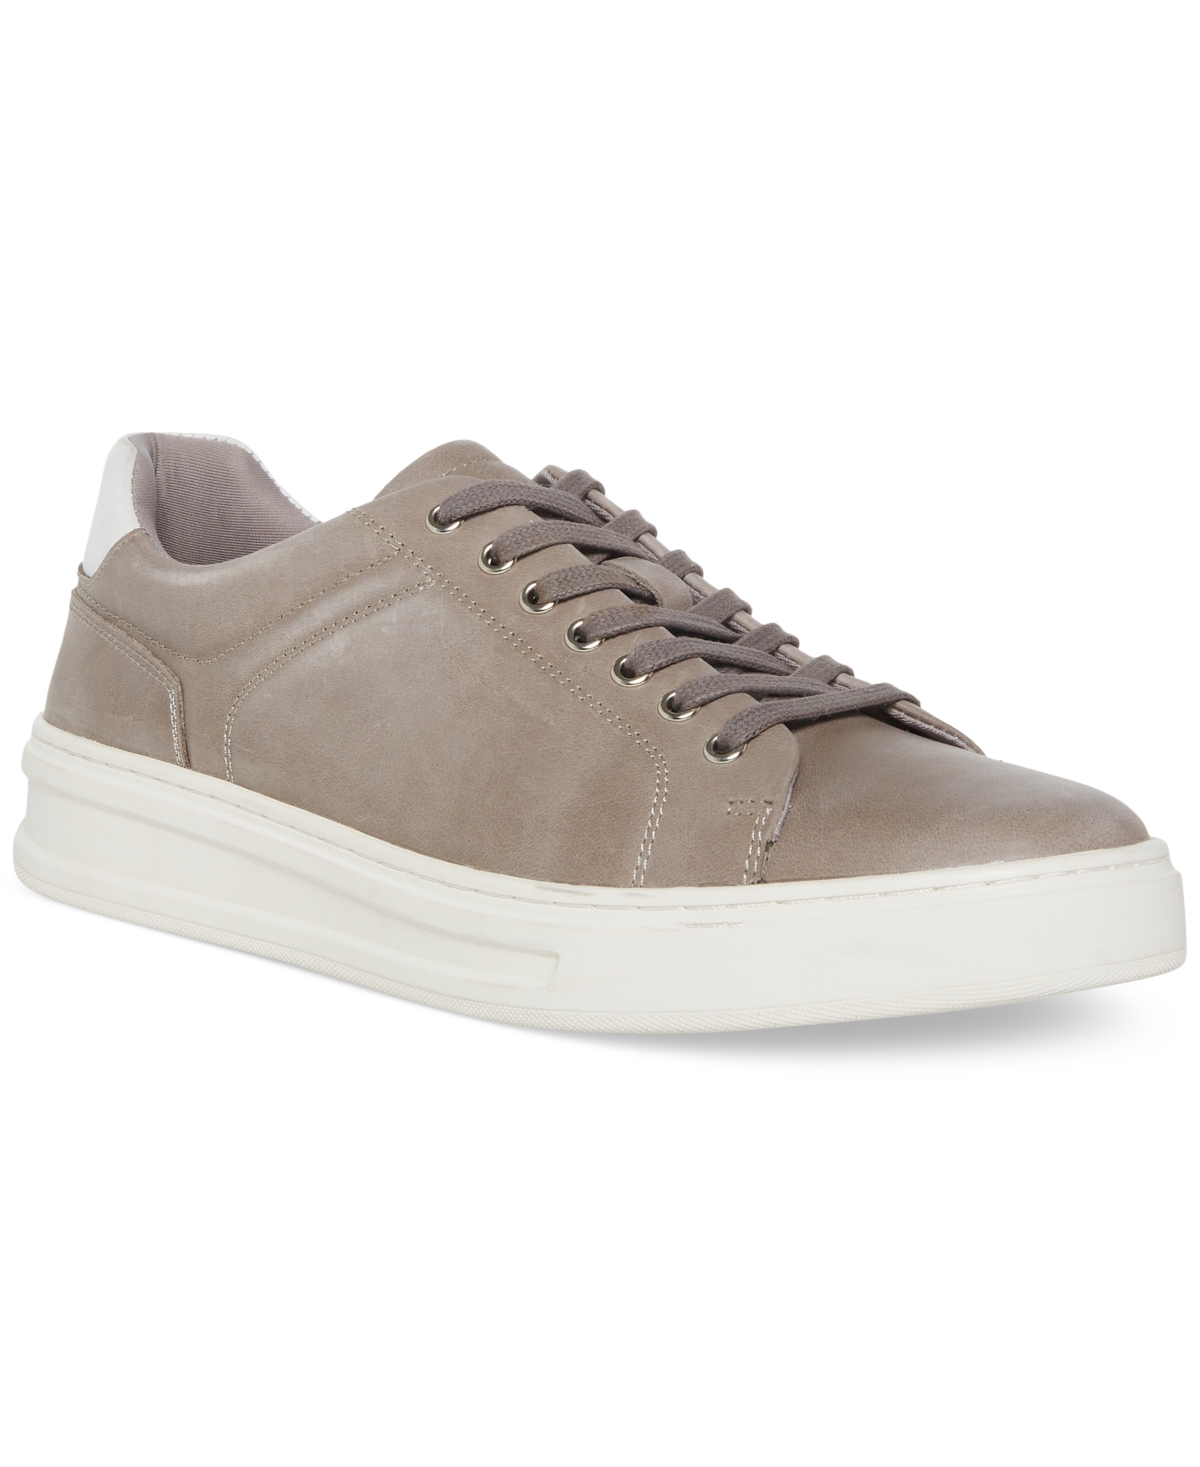 Men's Myler Waxed Leather Low-Top Sneaker - Taupe